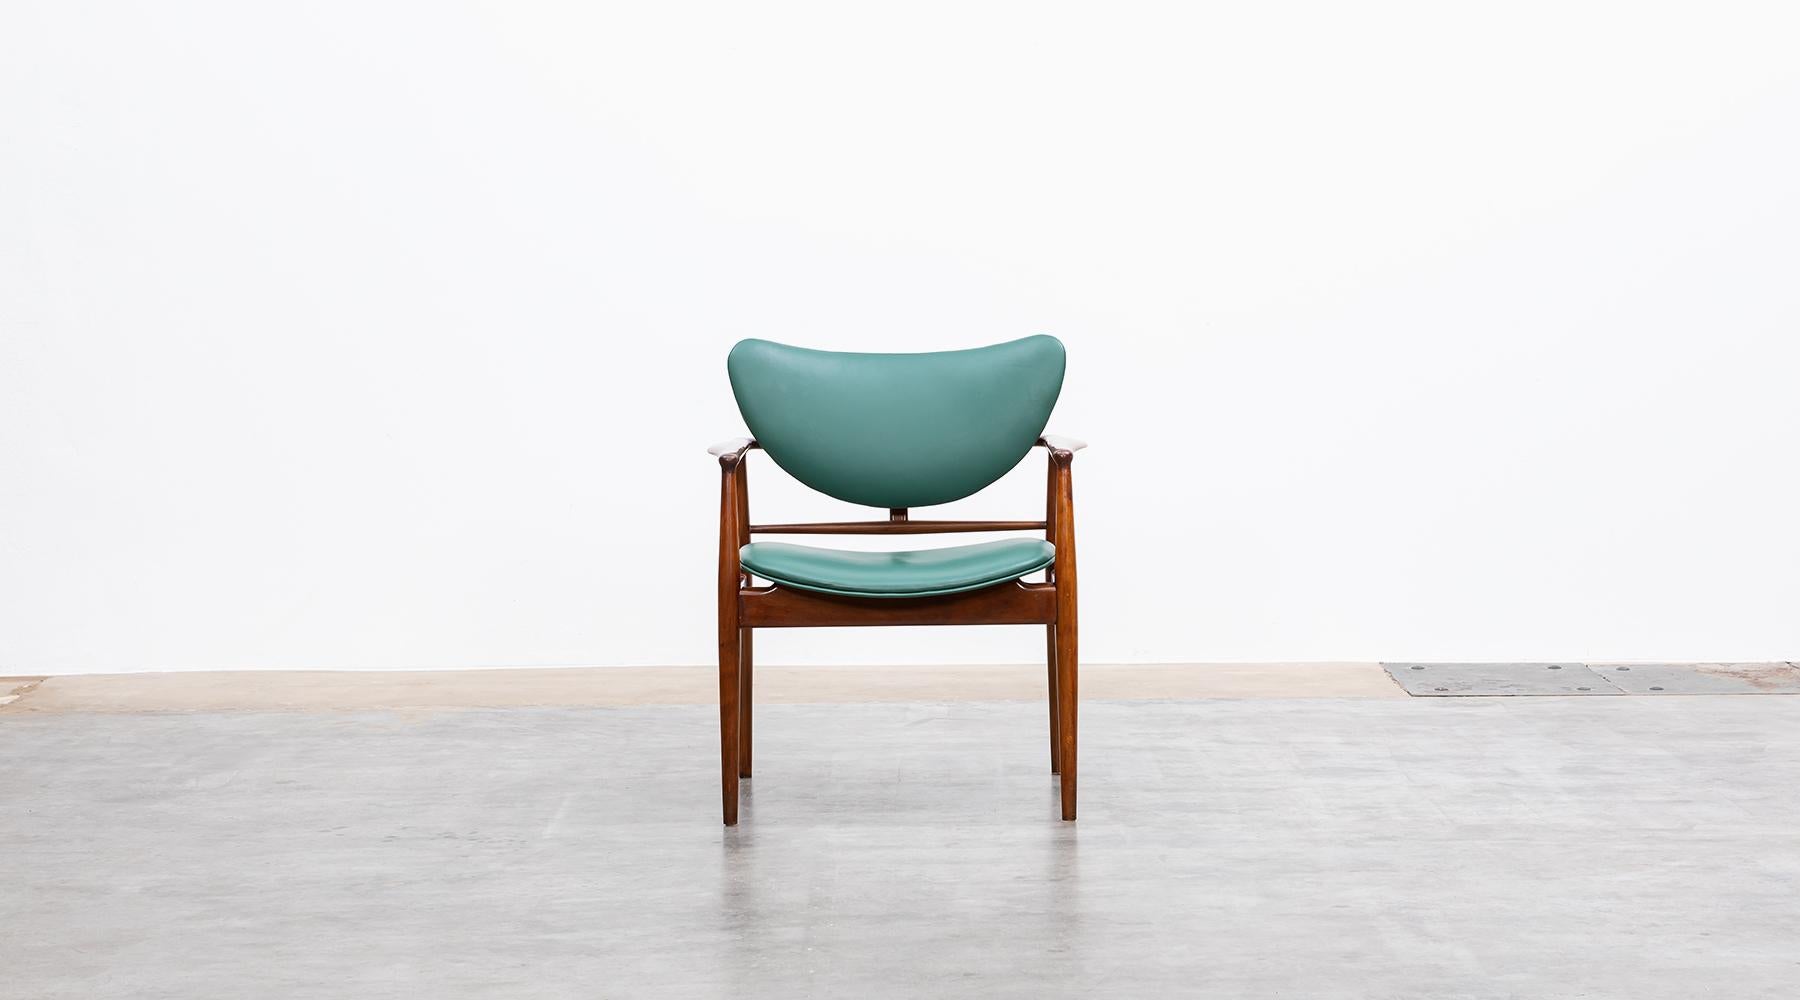 Armchair in teak by Finn Juhl, manufactured by Niels Vodder, Denmark, 1950.

A beautiful single chair that can also stand well on its own or combine well with a seating group. the frame comes in teak and the back and seat are in green faux leather